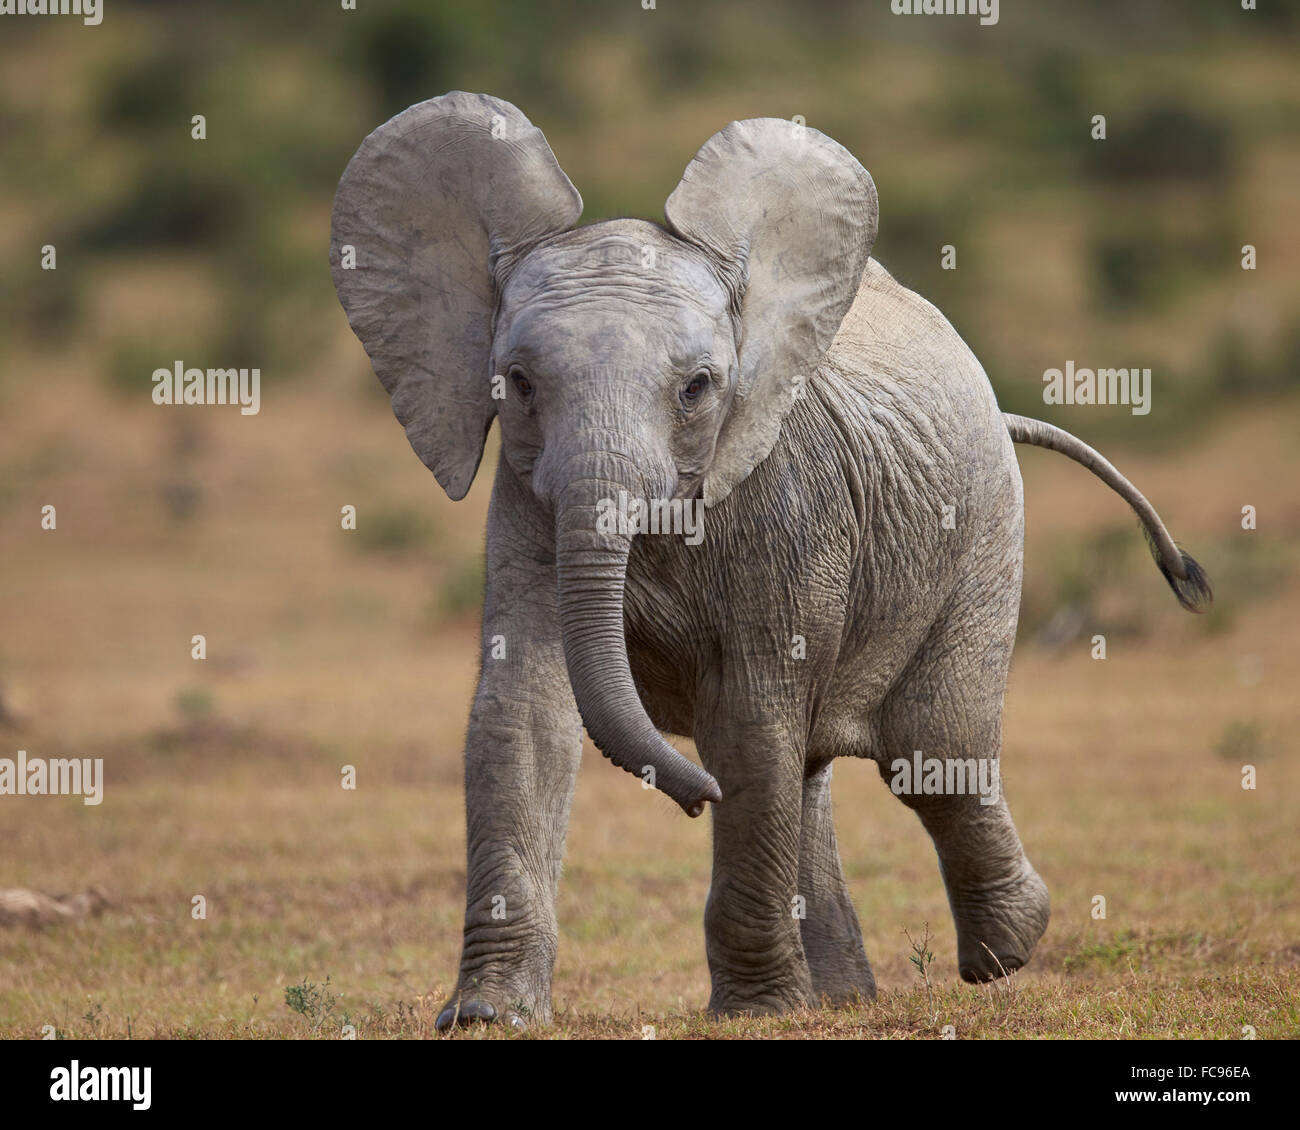 Young African elephant (Loxodonta africana), Addo Elephant National Park, South Africa, Africa Stock Photo